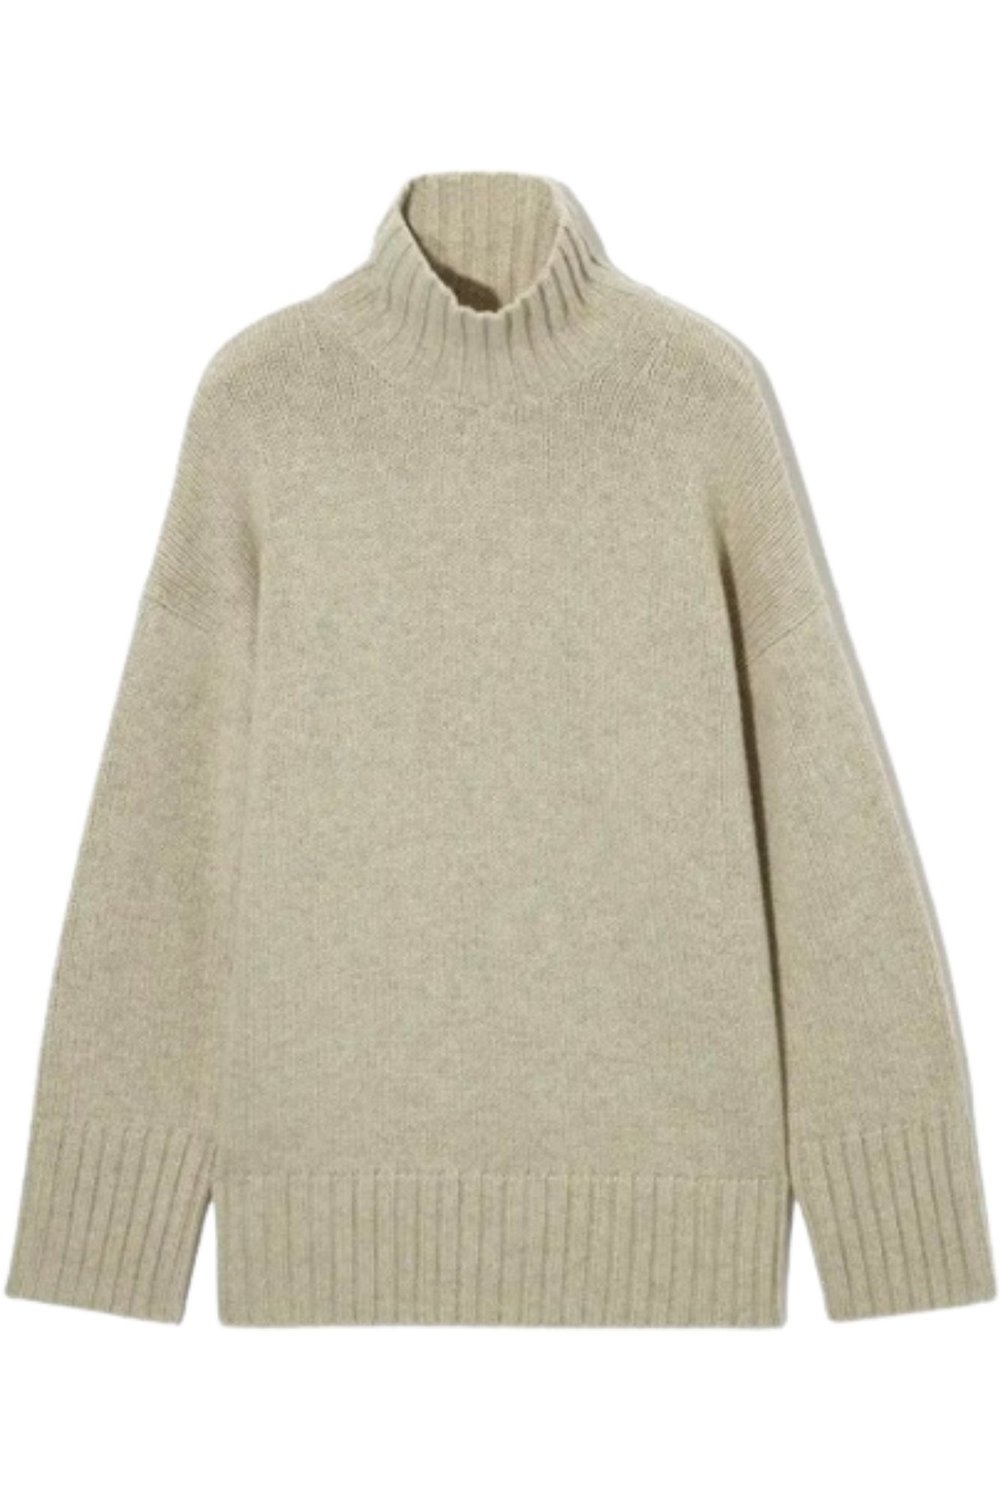   COS   FUNNEL-NECK PURE CASHMERE SWEATER  $350 